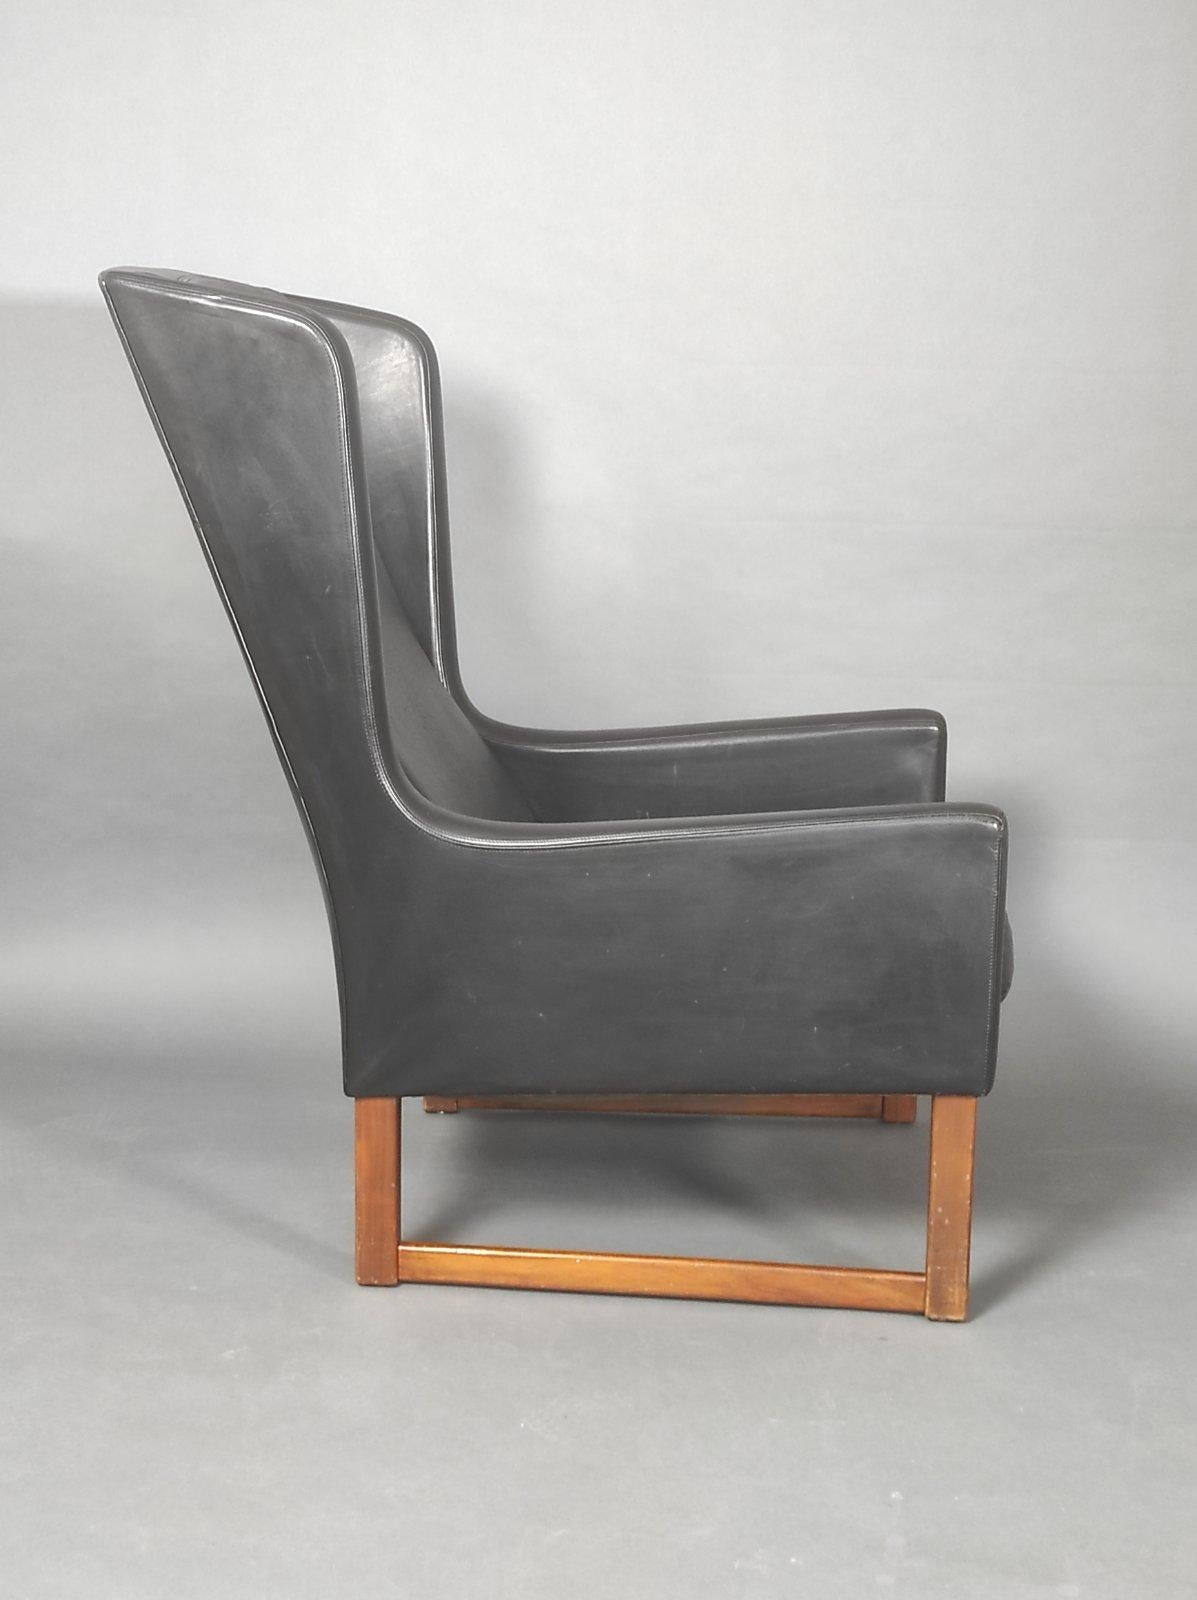 Mid-20th Century Vintage Leather Longue Chair By Rudolf B. Glatzel for Alfred Kill 1960s For Sale